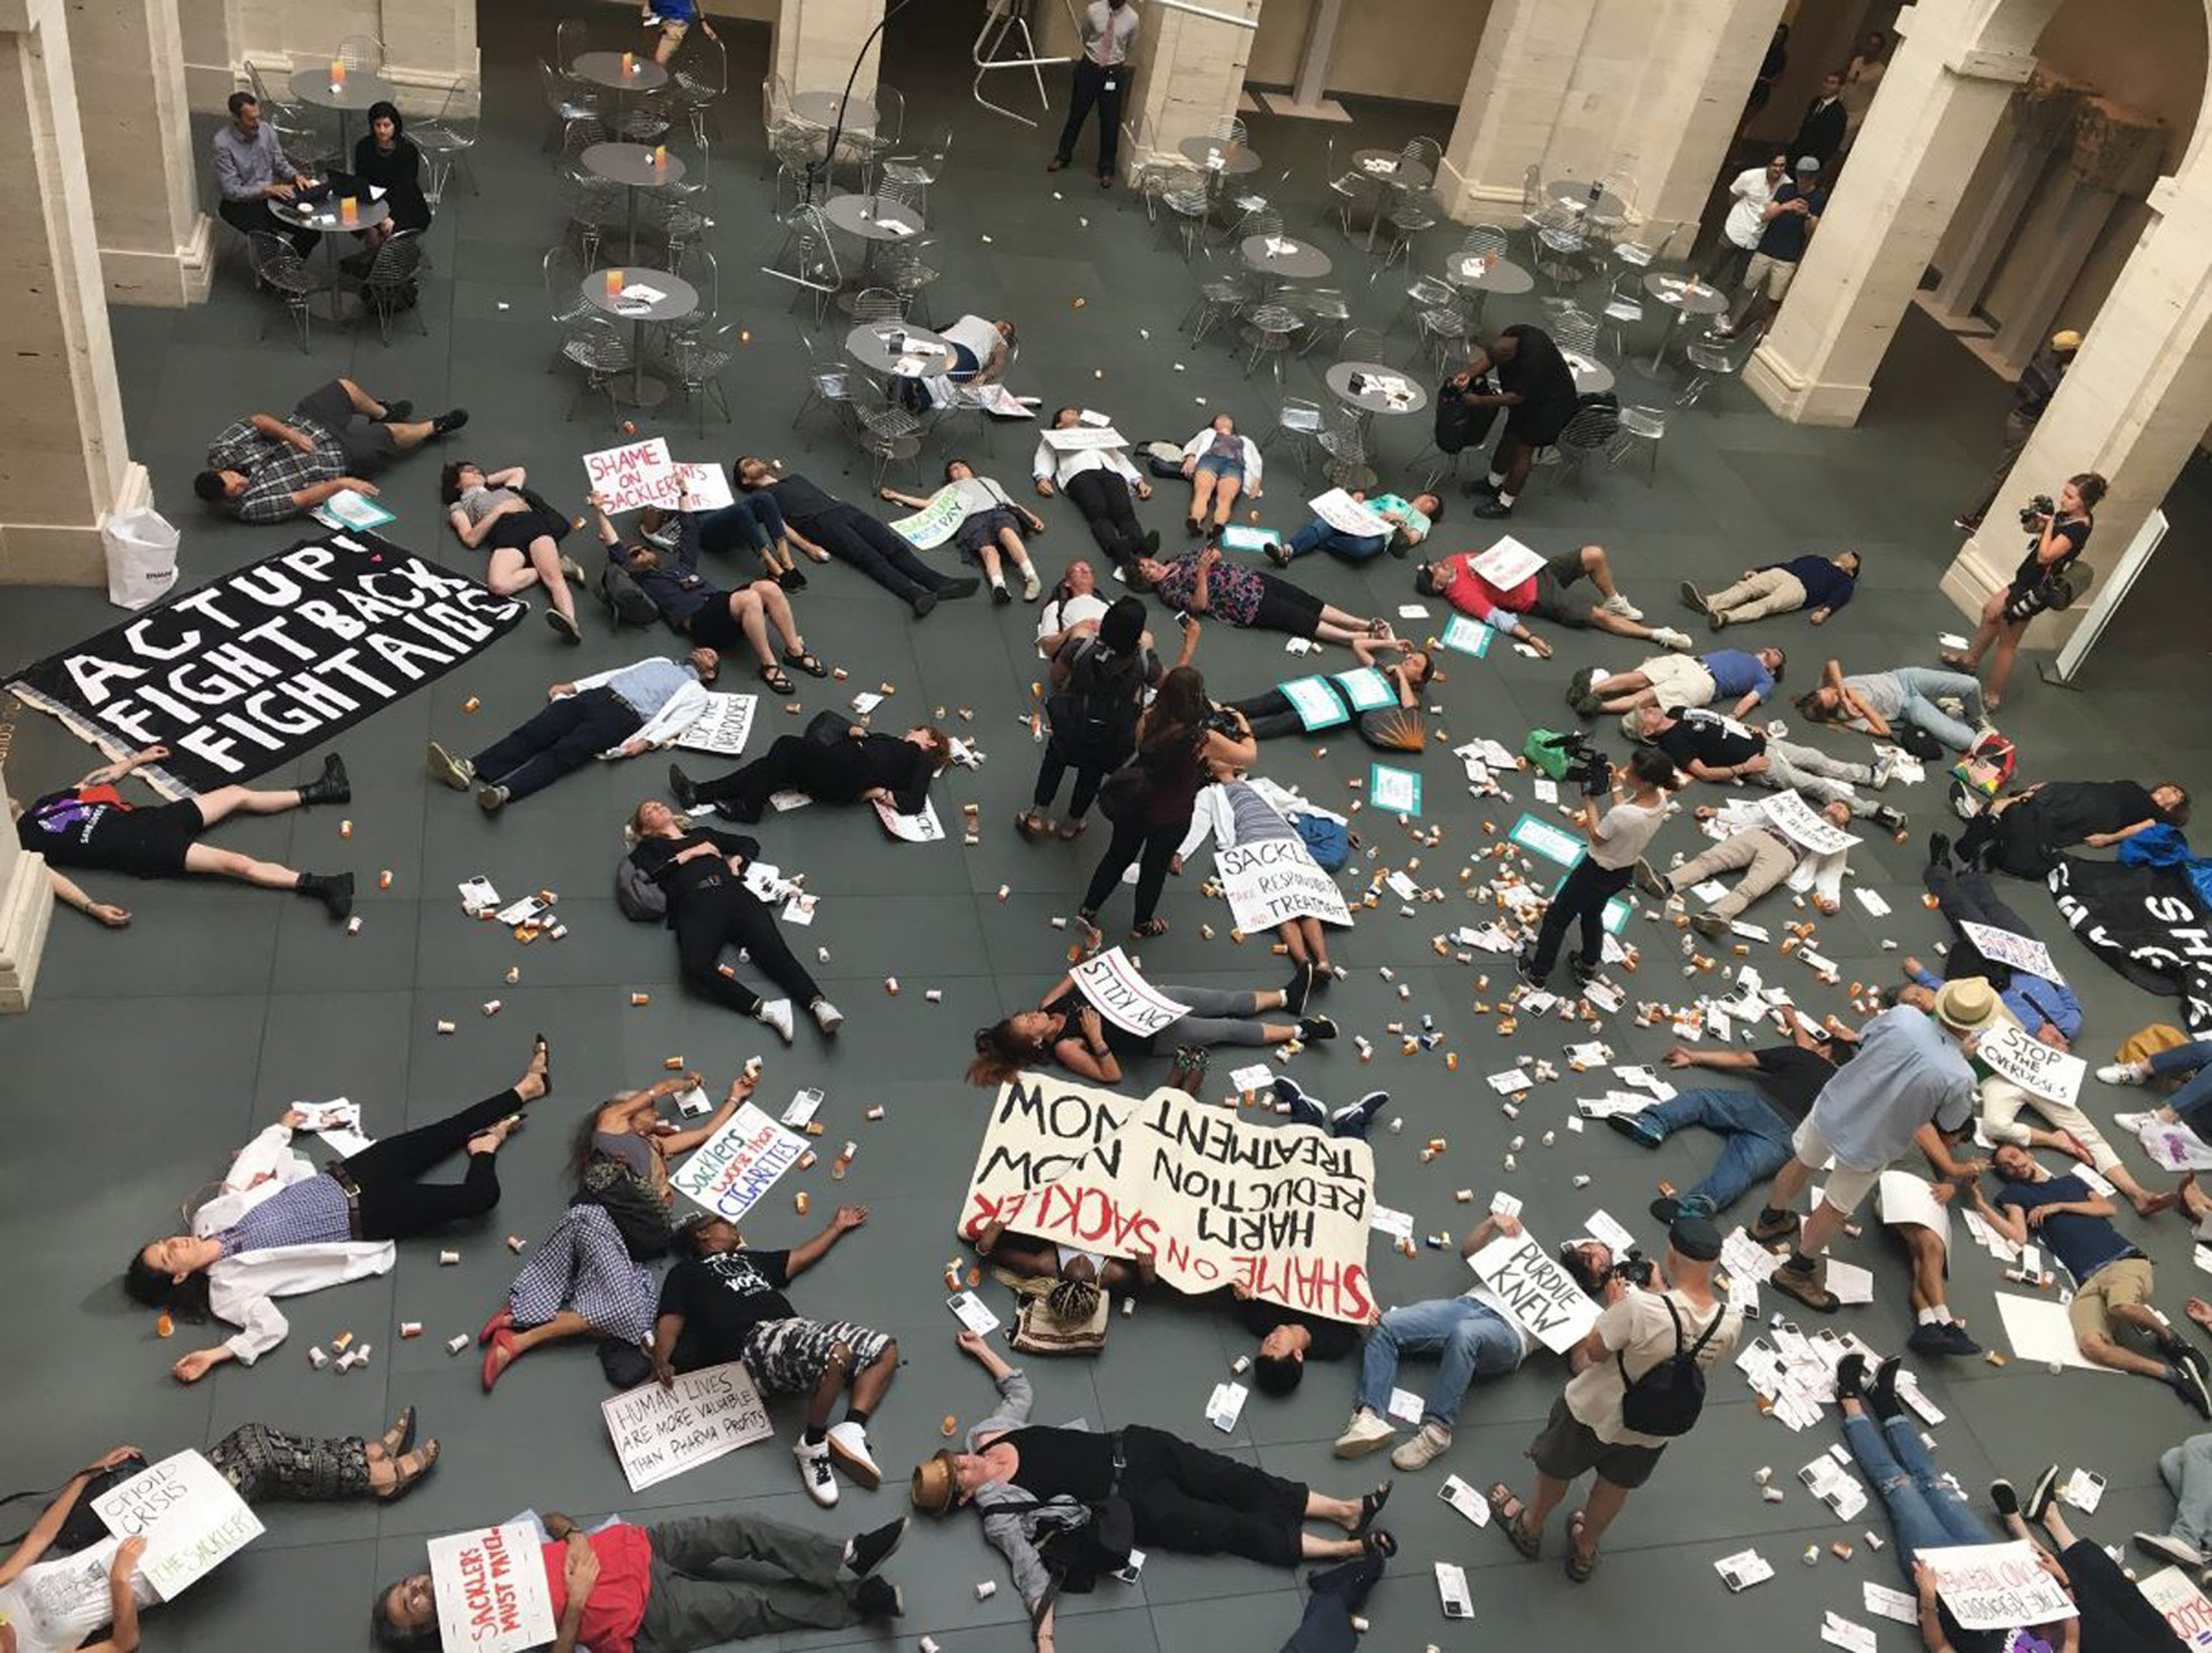 Protestors lying on the ground of a museum floor, signs that say: 